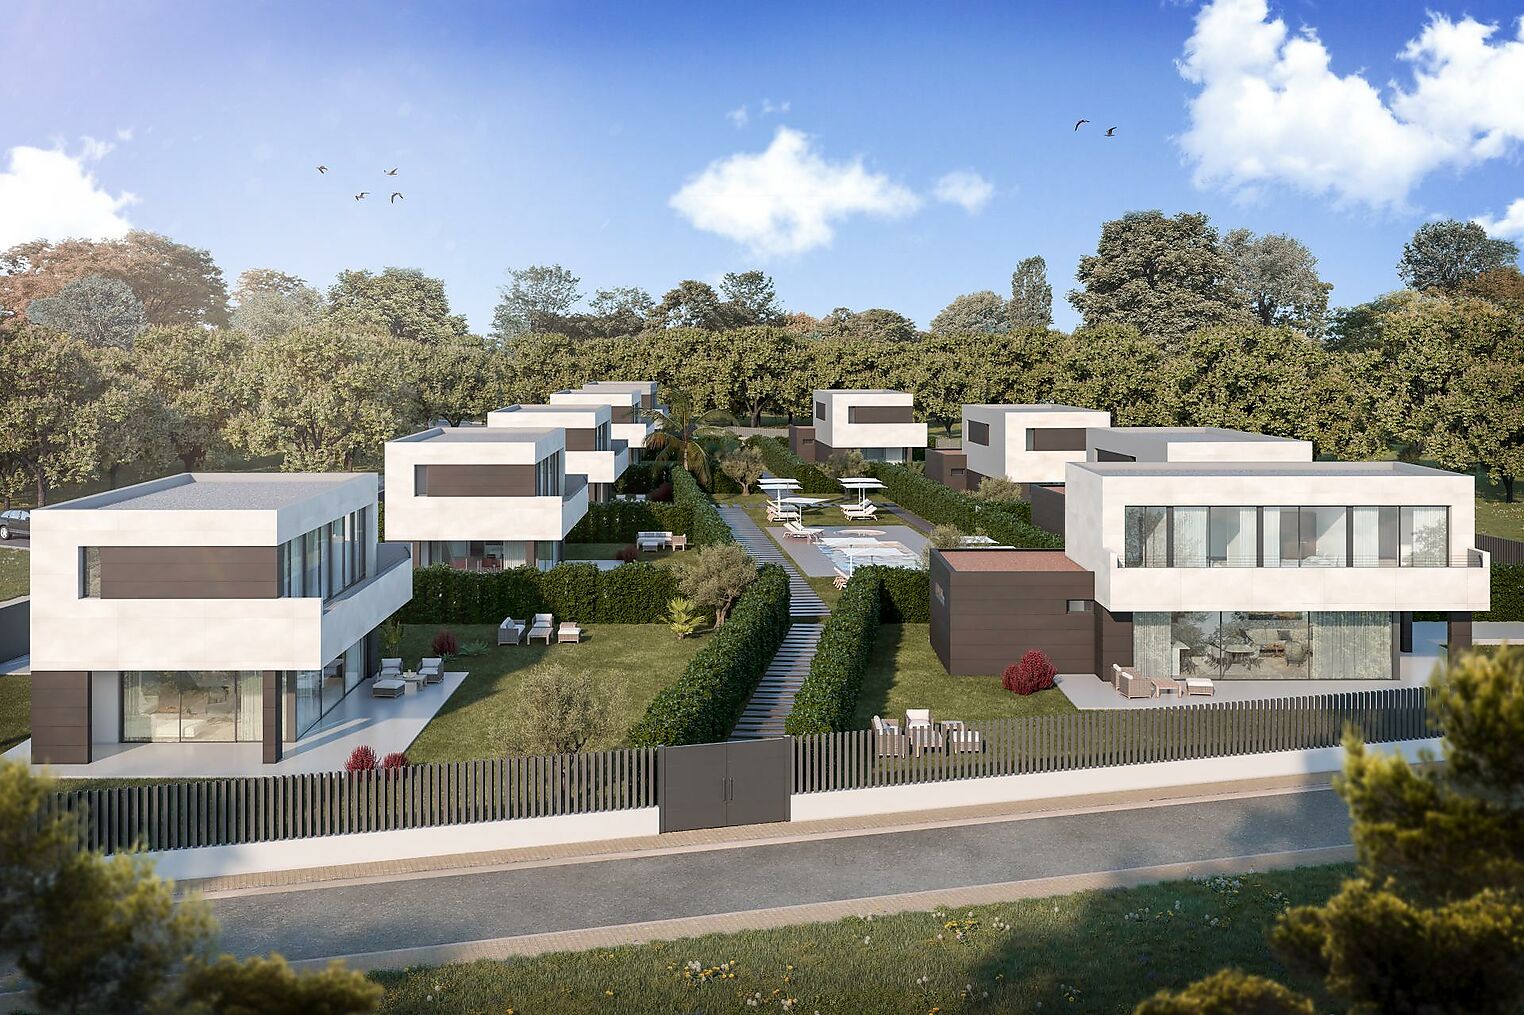 Promotion of 9 luxury houses with communal garden and pool in Begur